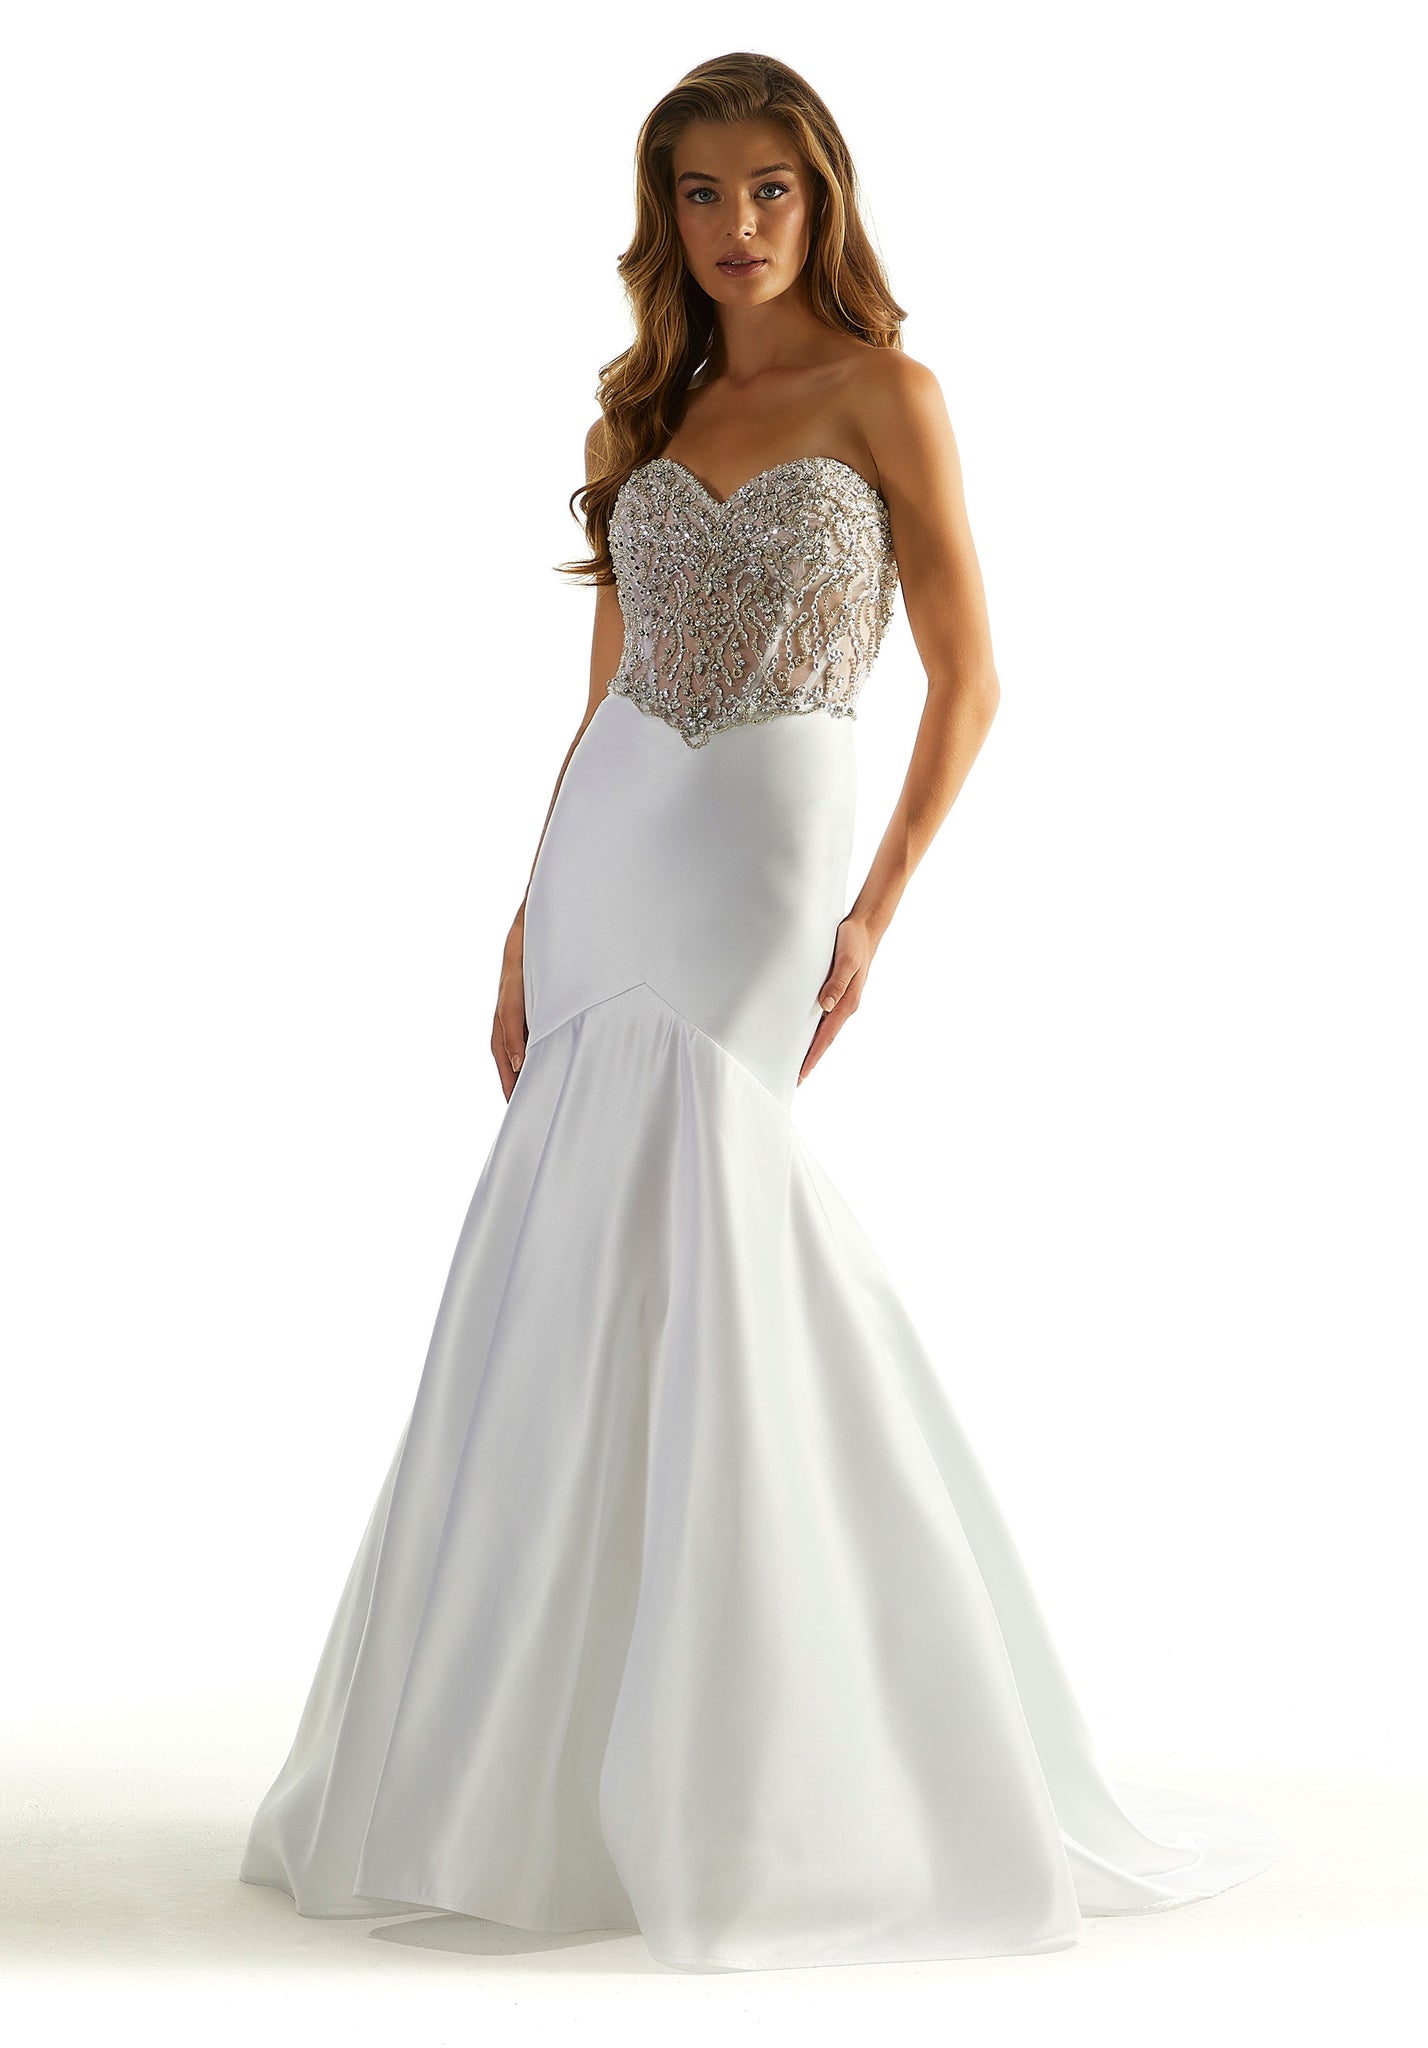 Feel elegant when wearing this beautiful long fitted mermaid dress by Morilee, style 49090. This number showcases a unique strapless sweetheart neckline with a full beaded see through corset top leading to a back zipper that will for sure hug your body beautifully. Featuring a satin skirt with ruching in the back. You will for sure look unqiue throughout the night.